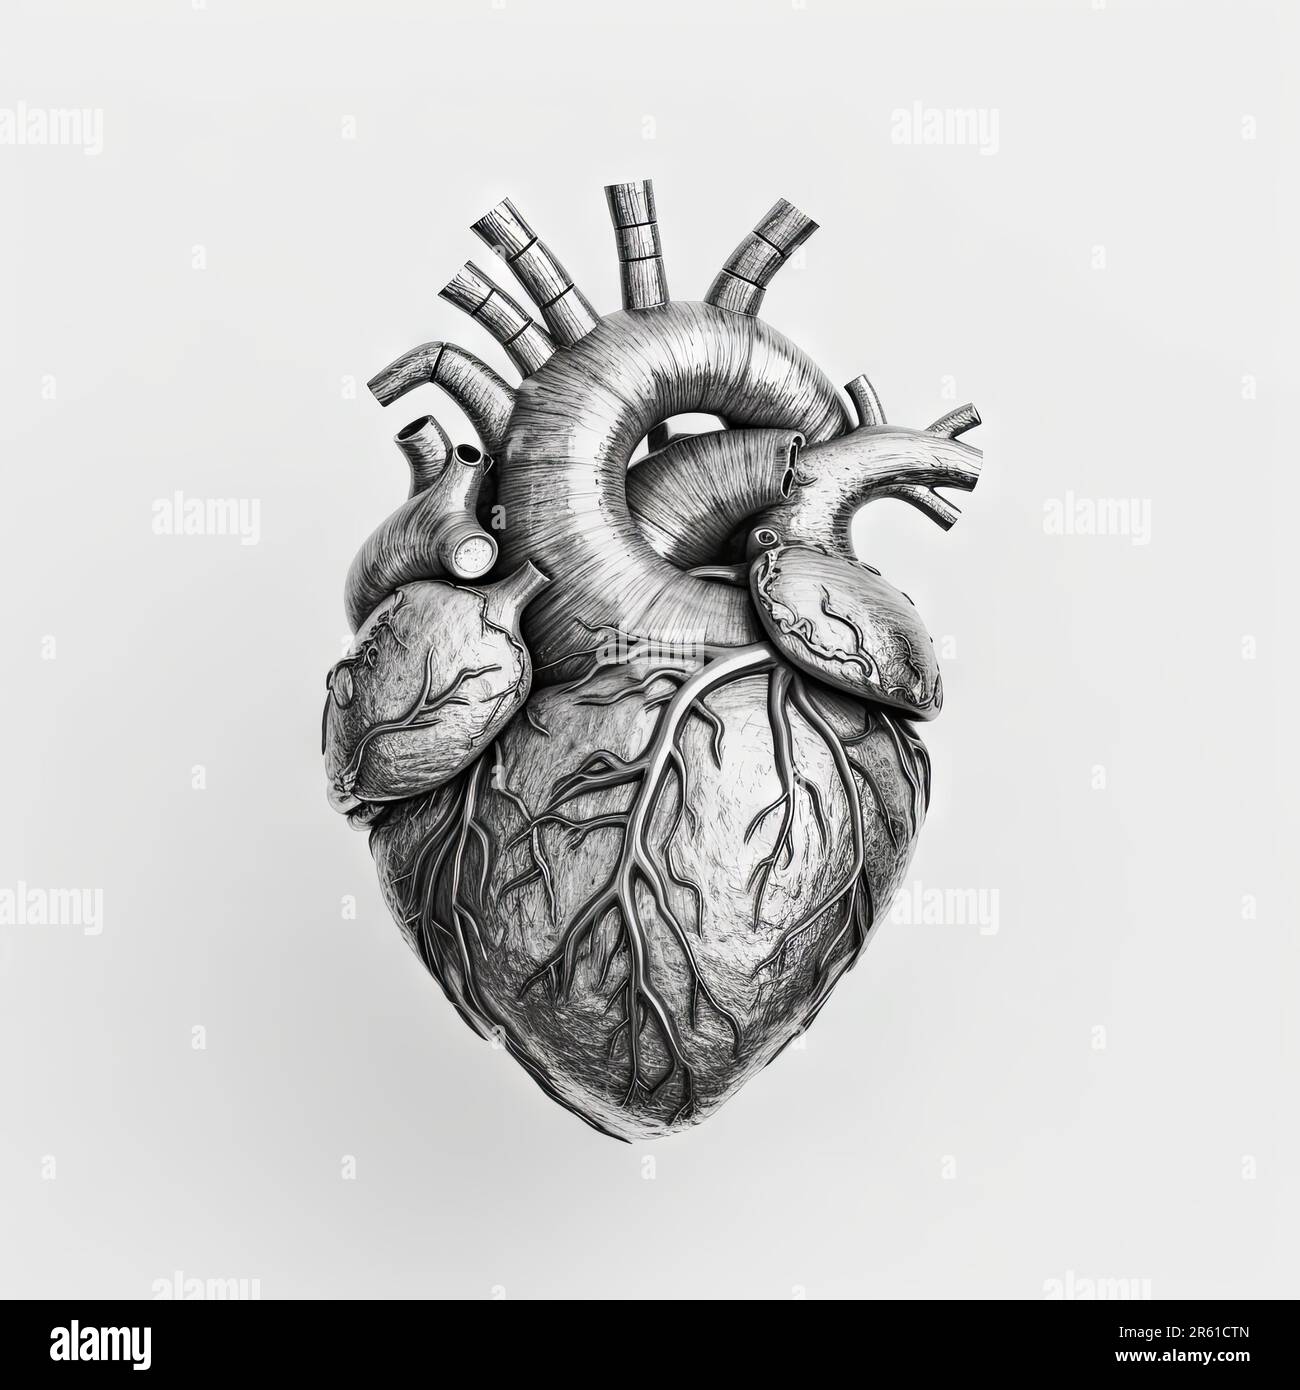 Heart Sketch Stock Photos and Images - 123RF